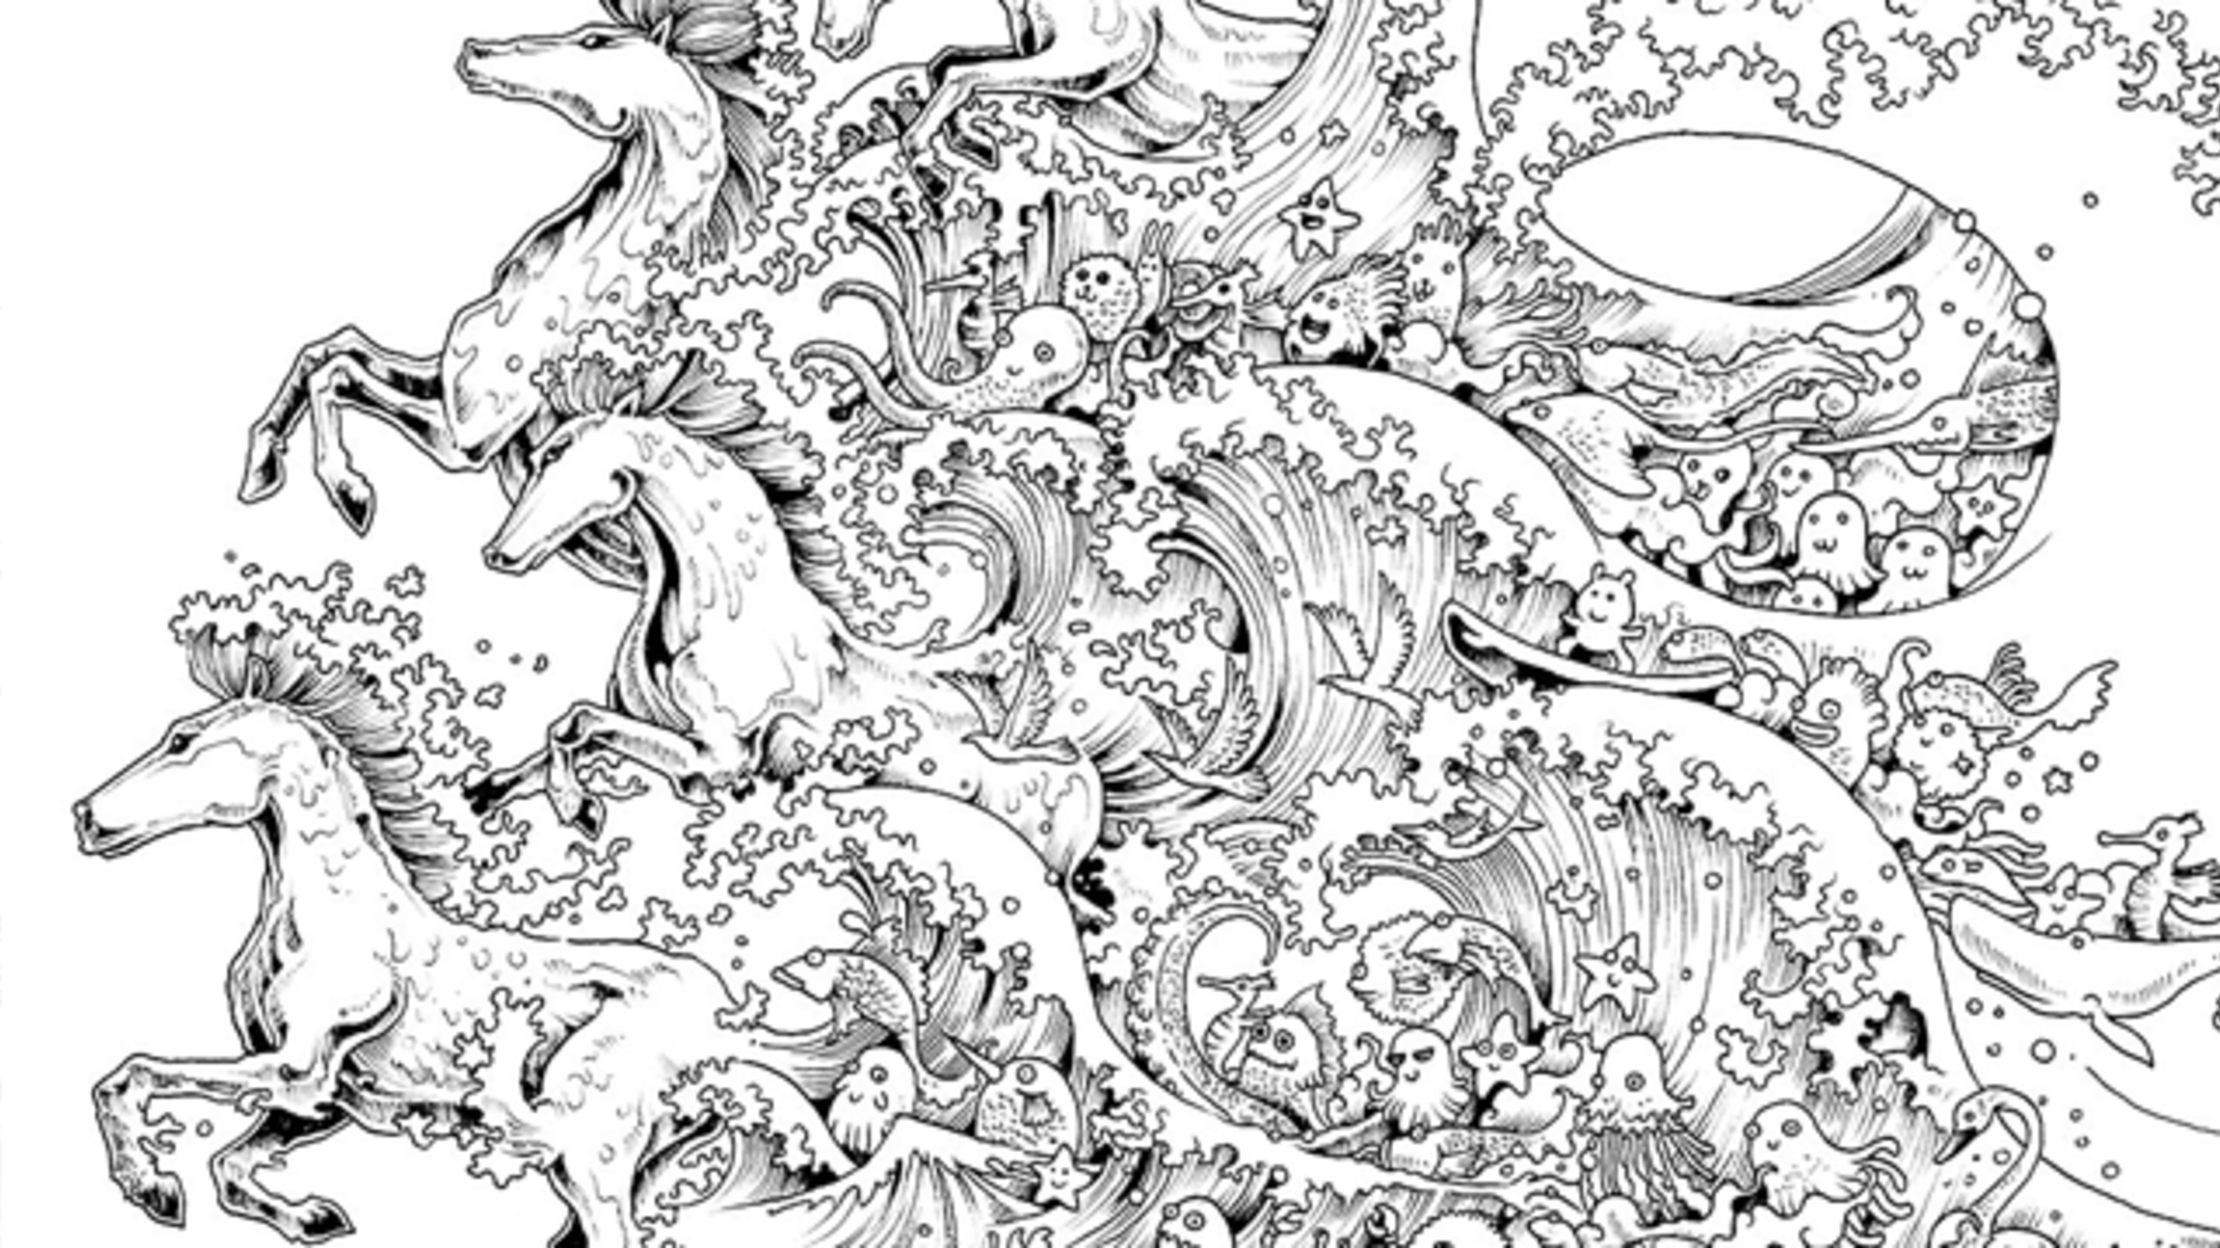 Download 10 Intricate Adult Coloring Books to Help You De-Stress | Mental Floss